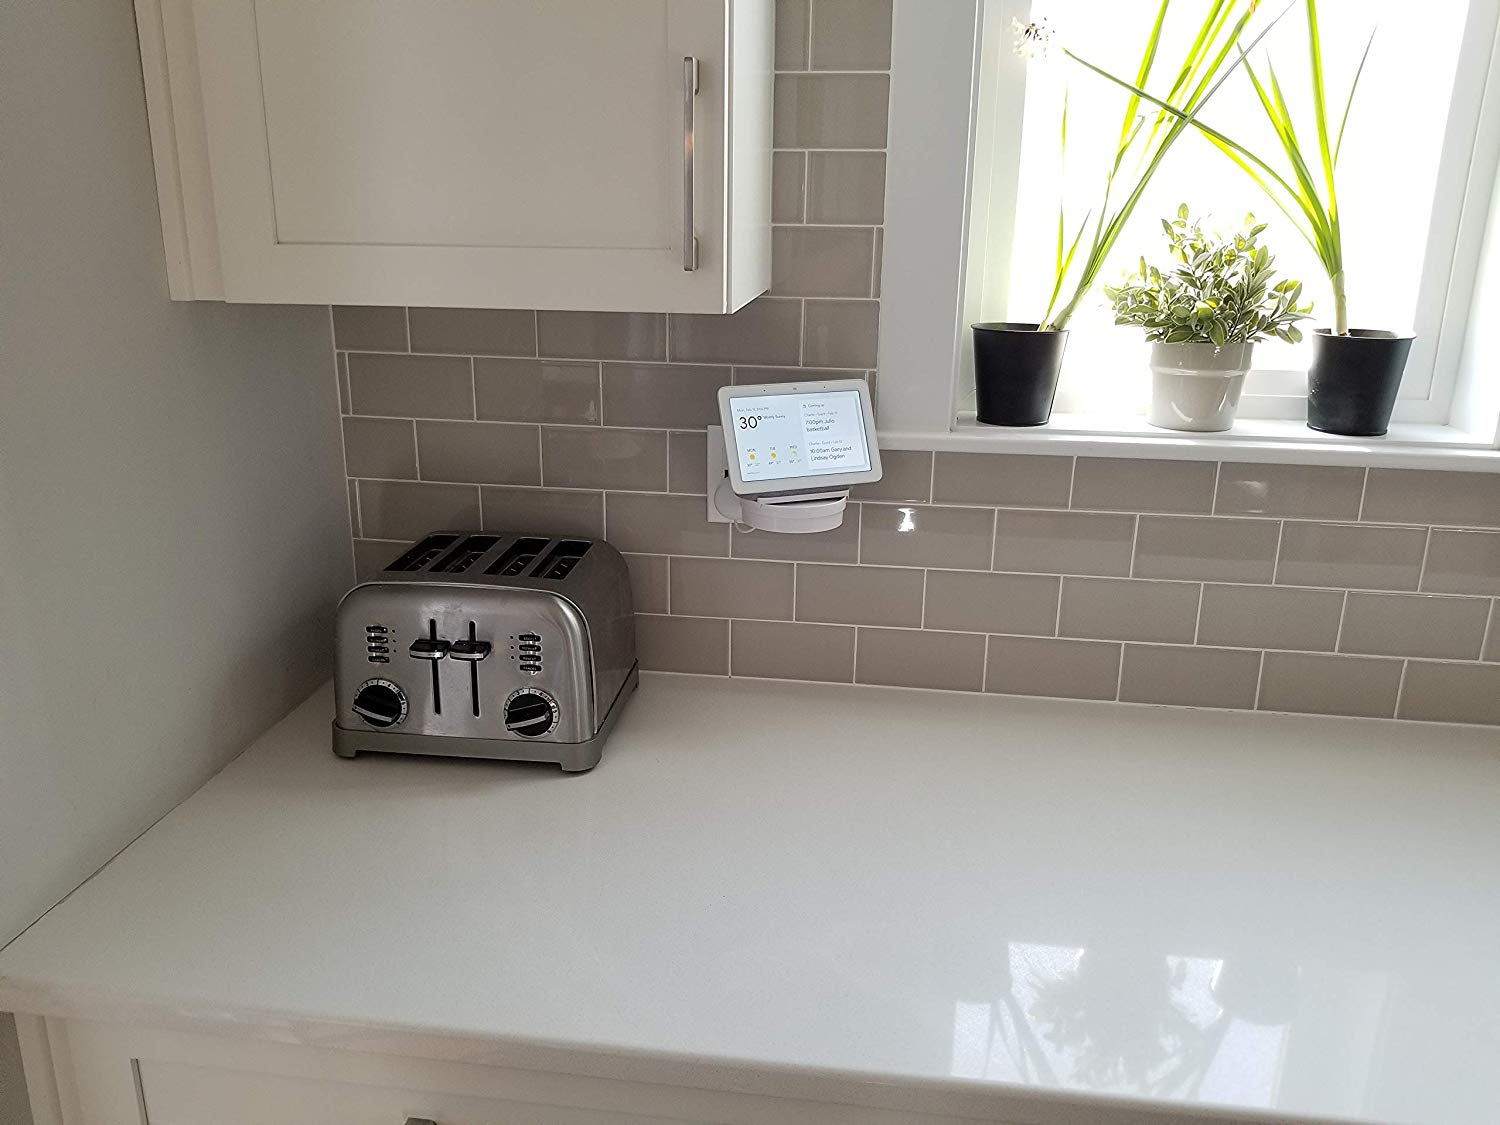 The Google Home Hub Nest Hub Mount for Kitchen and Bathroom Outlets